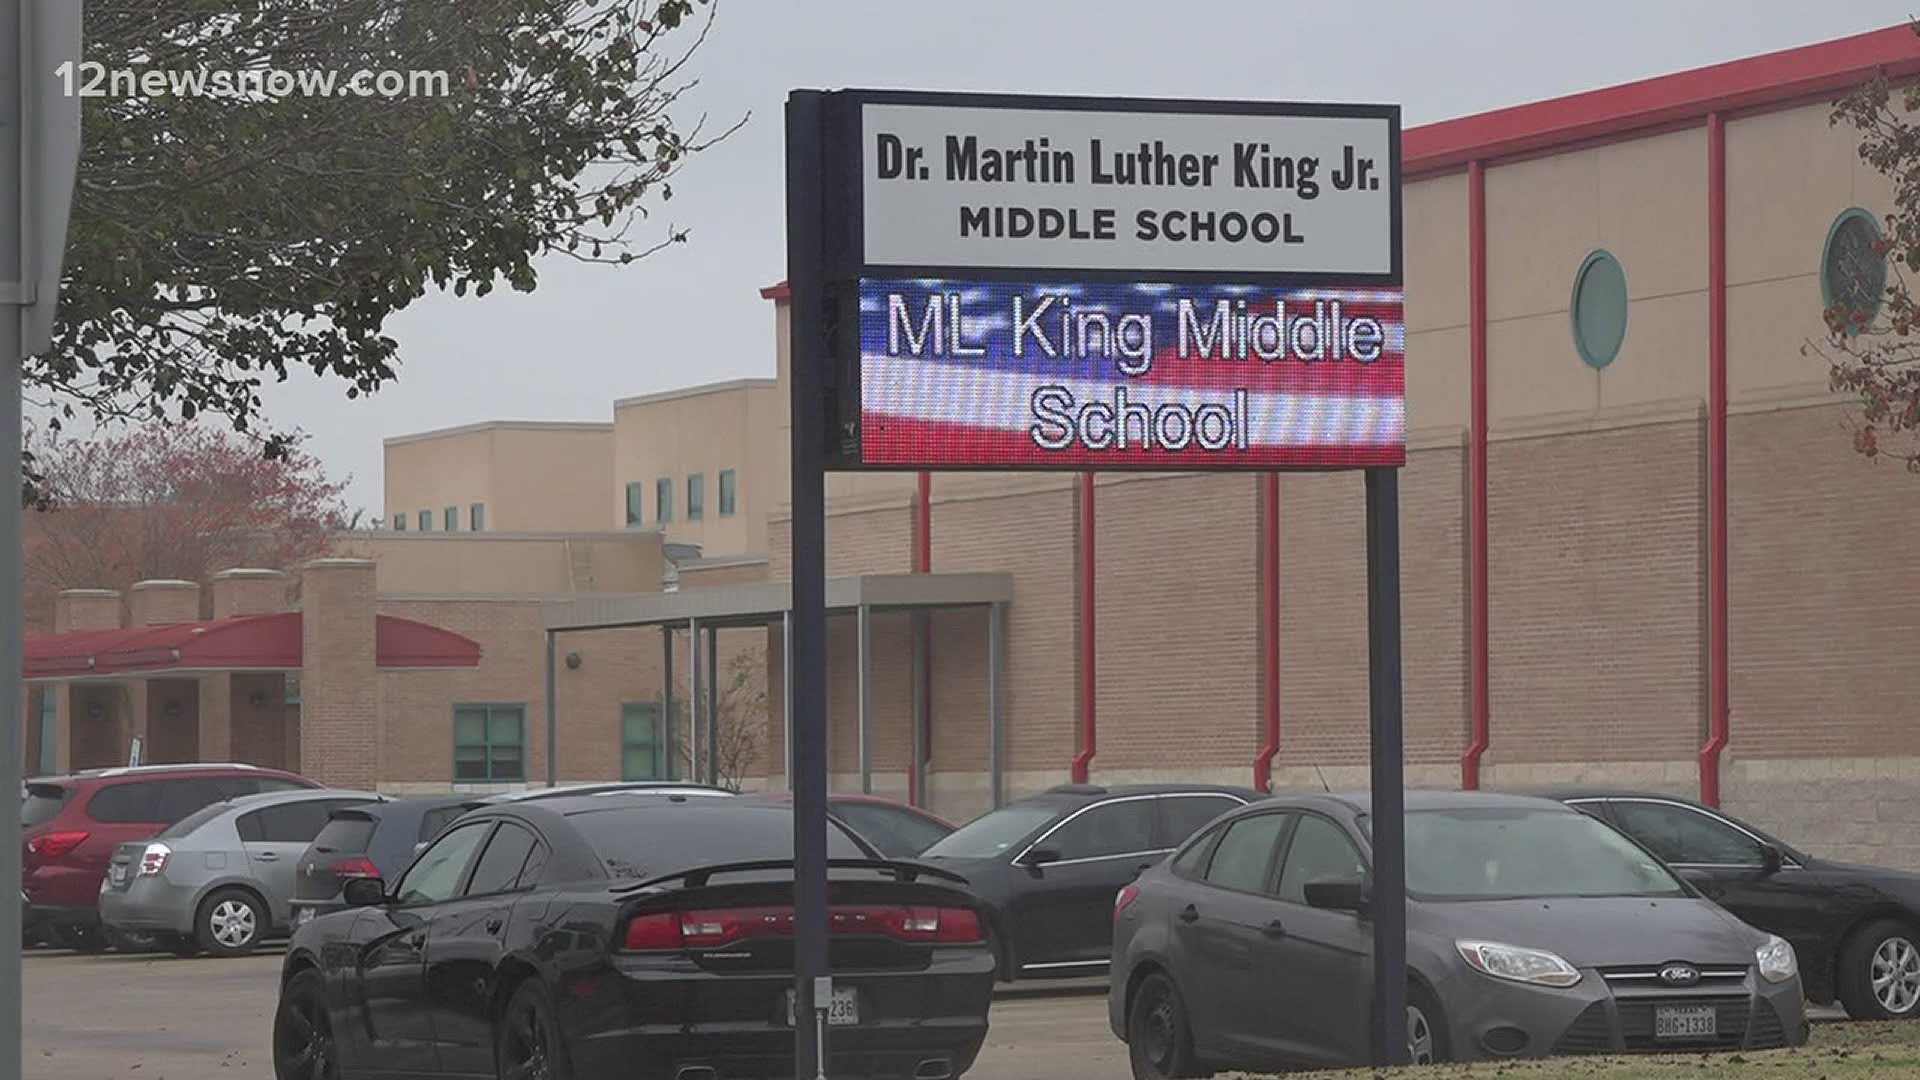 Martin Luther King Middle School has received five consecutive failing grades from the state.